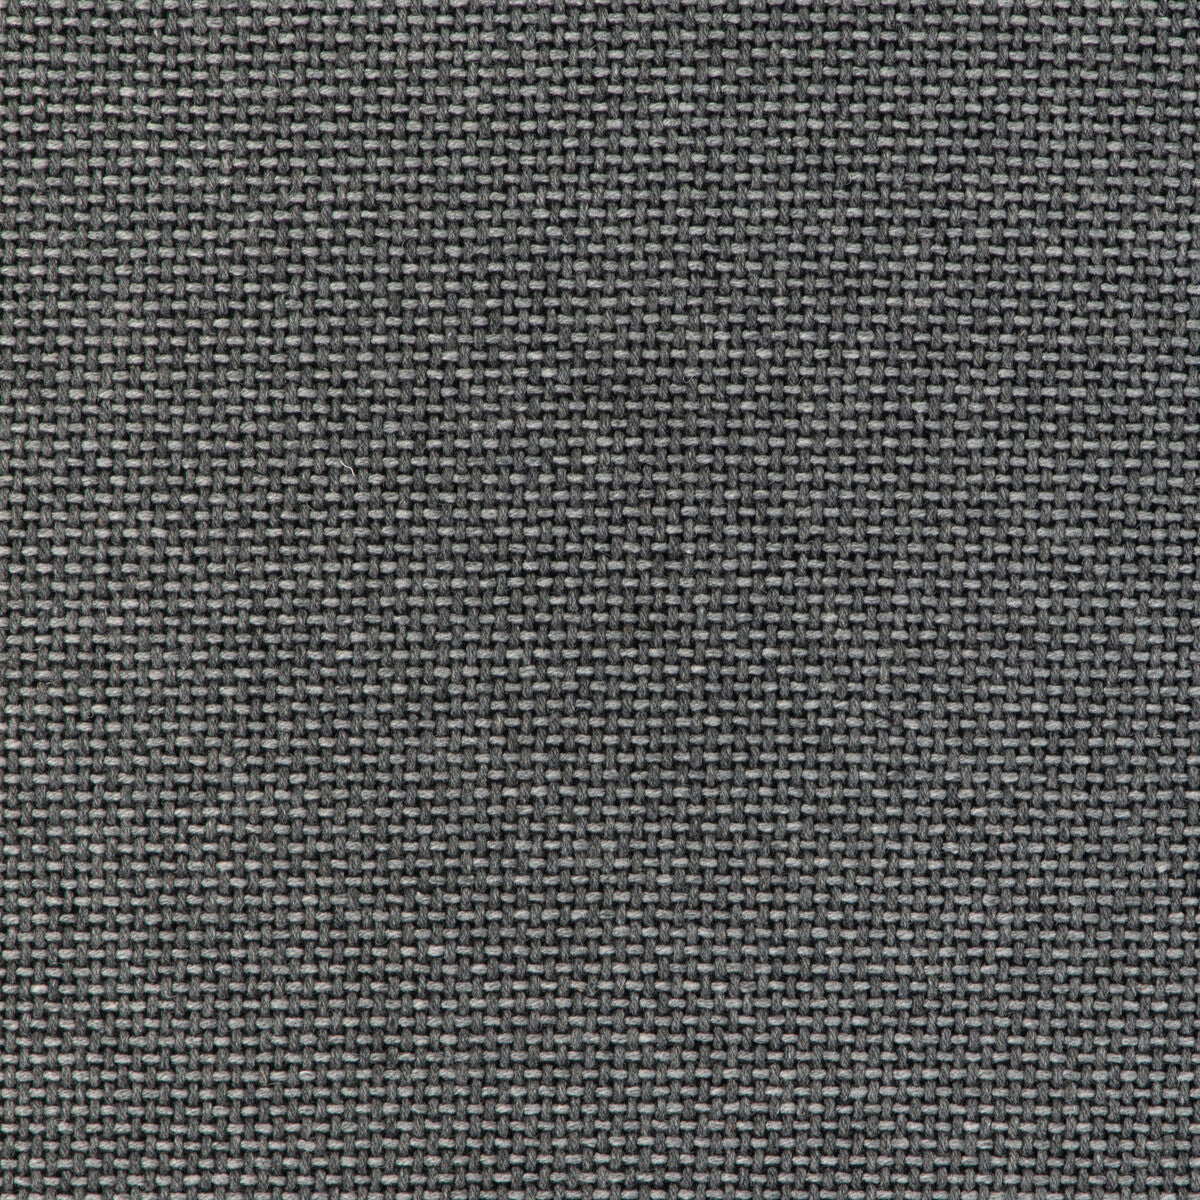 Easton Wool fabric in granite color - pattern 37027.2111.0 - by Kravet Contract